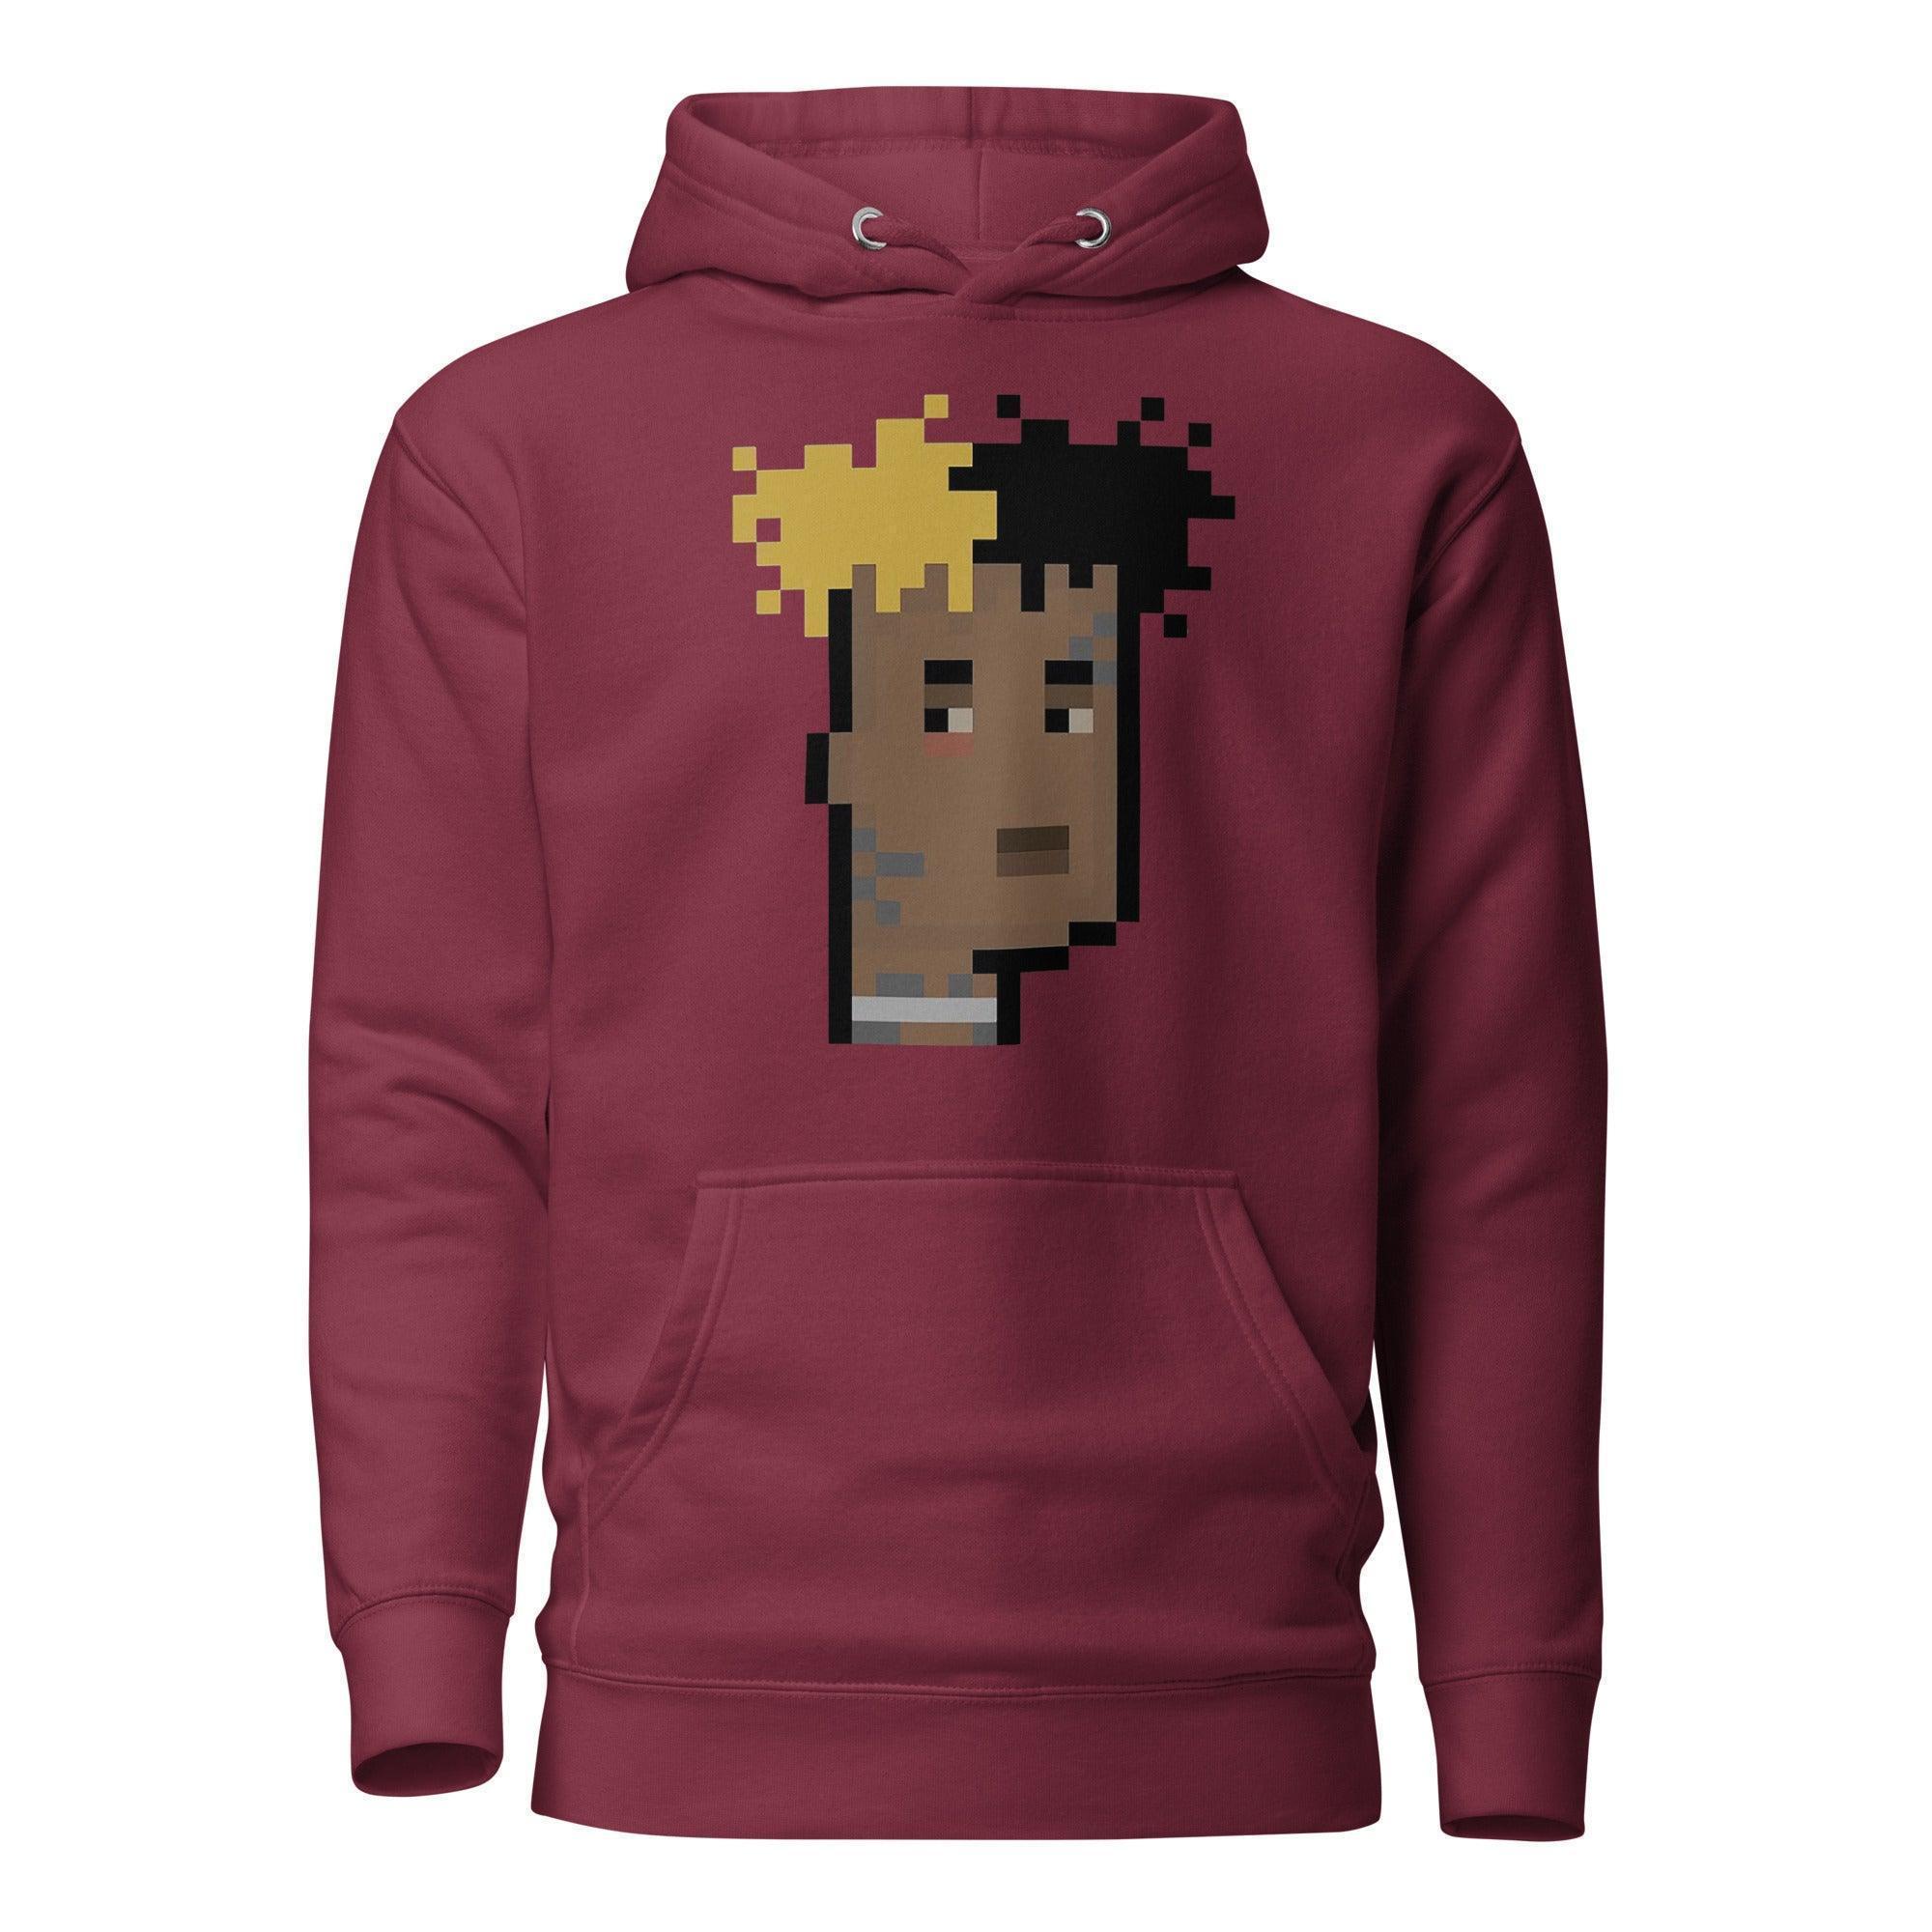 Celebrity Punk 6 Pullover Hoodie - InvestmenTees